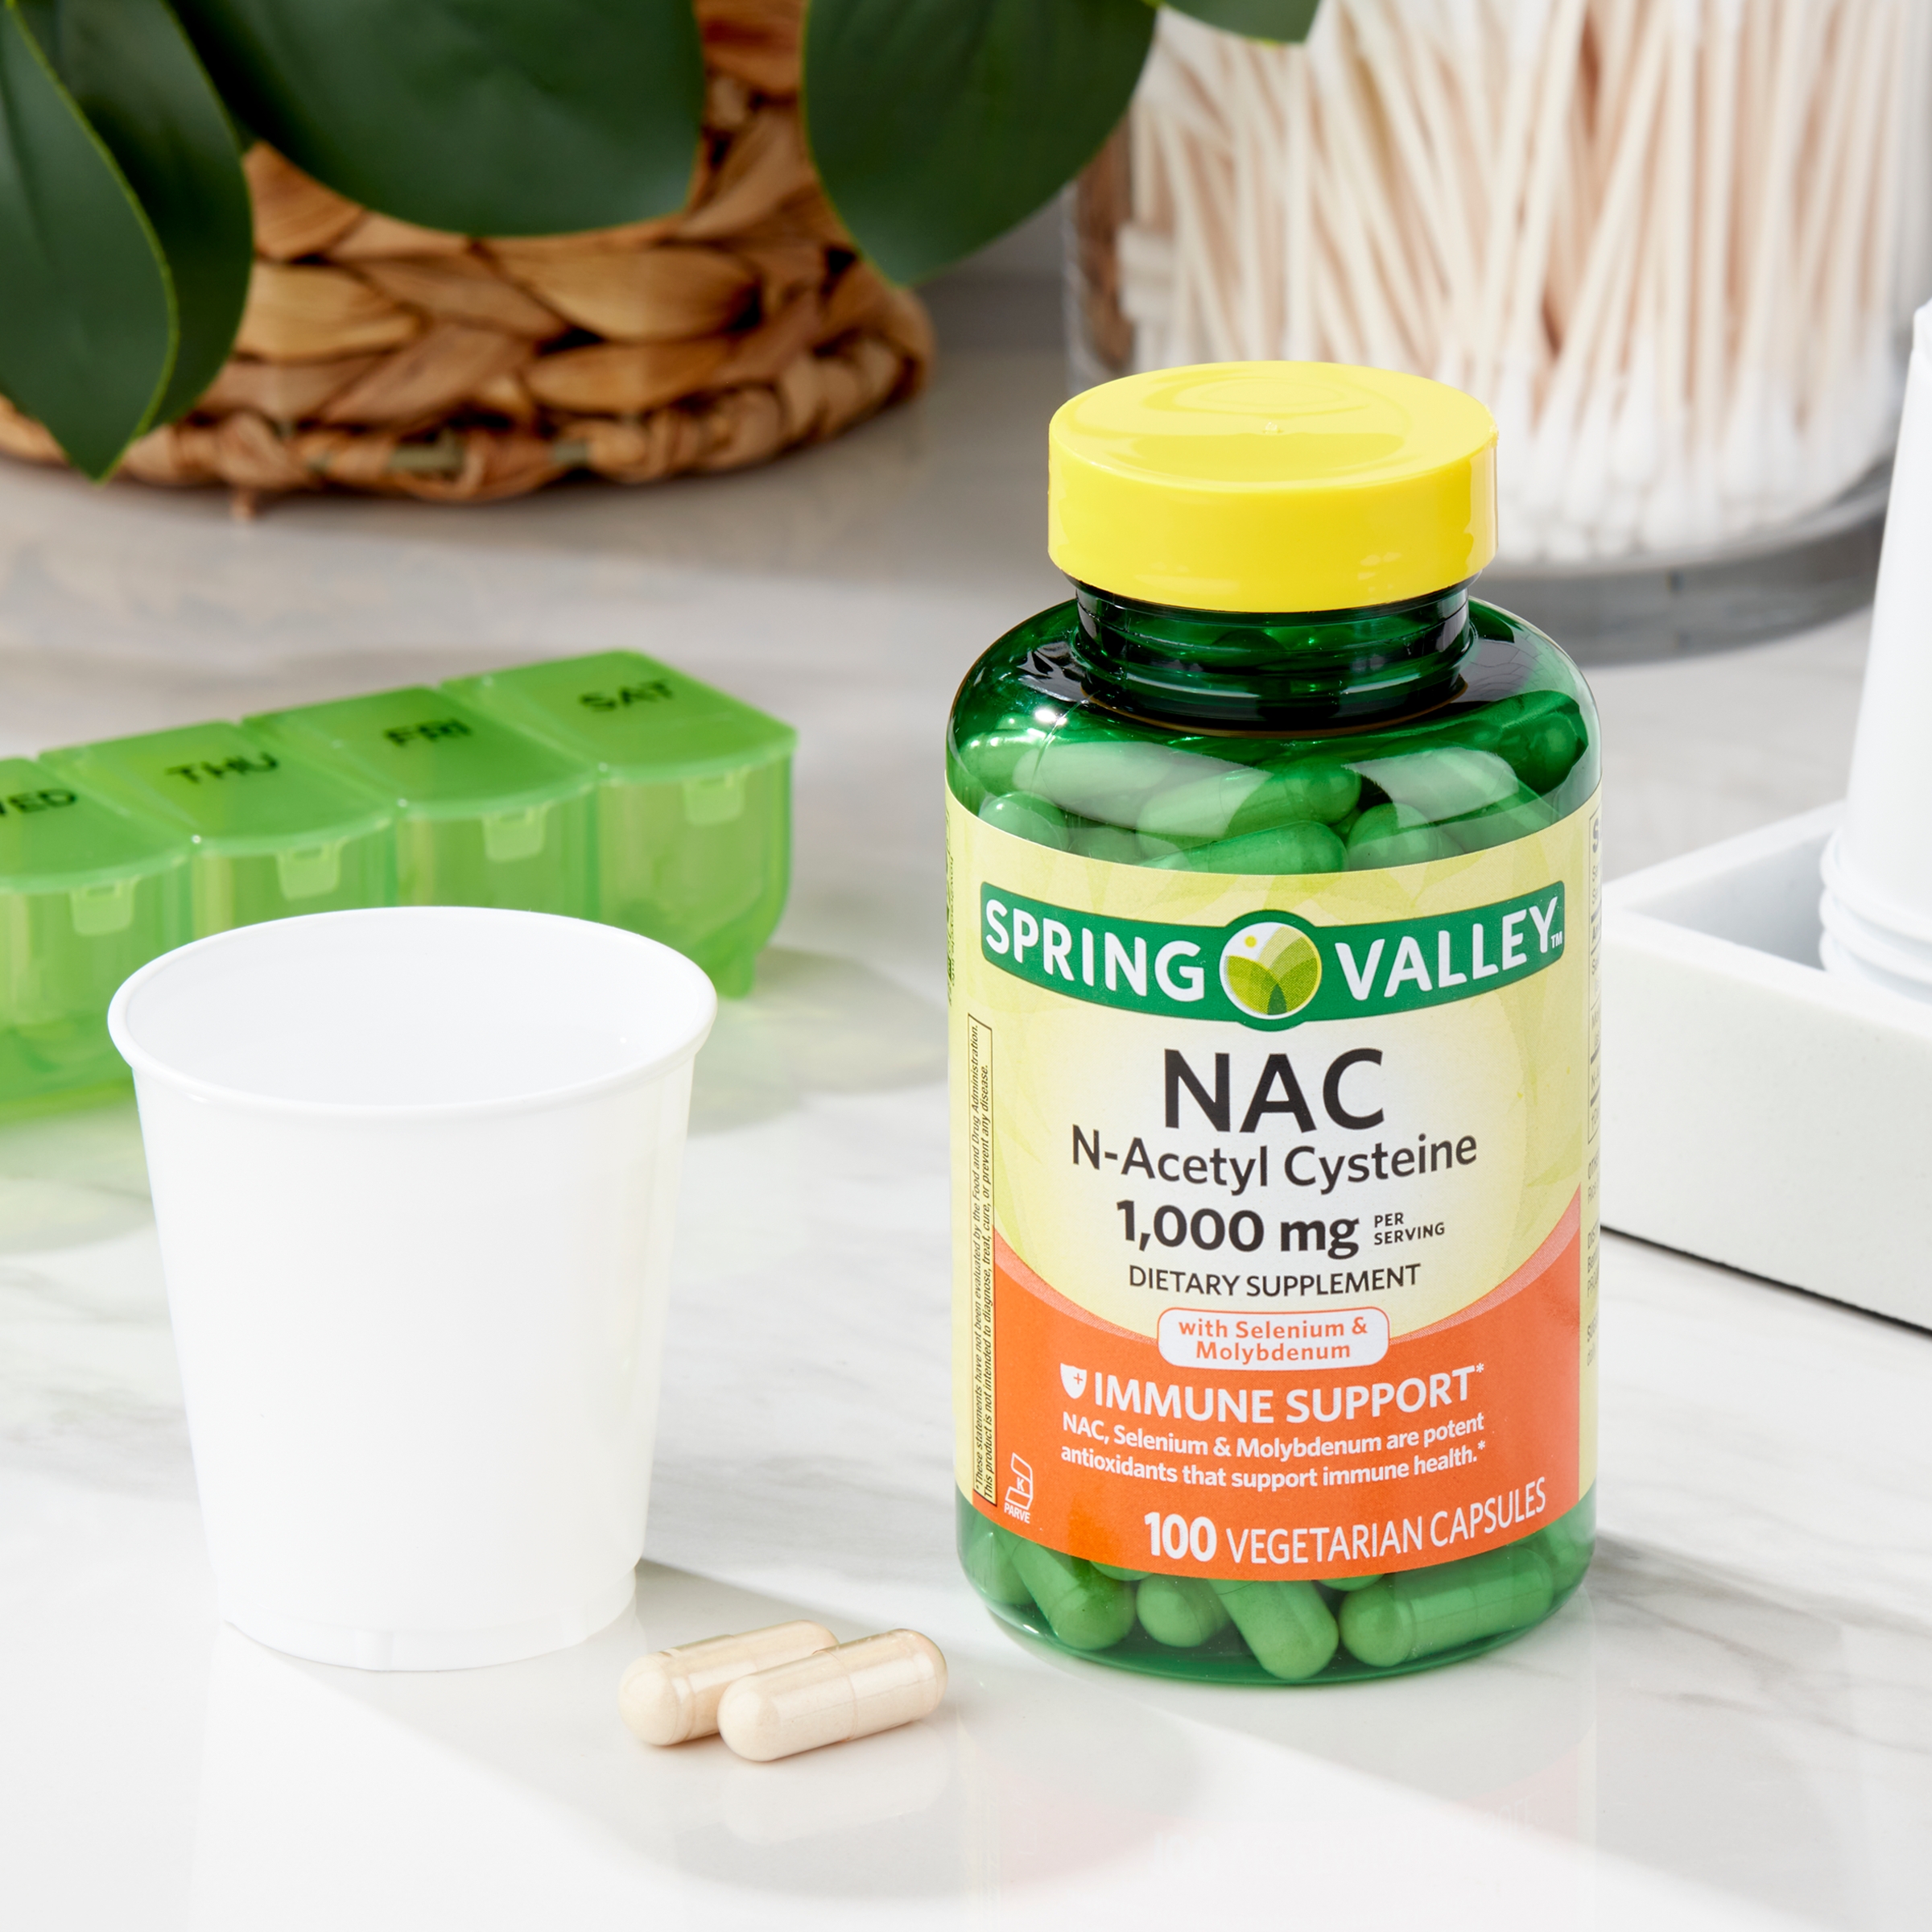 Spring Valley NAC Vegetarian Capsules Dietary Supplement, 1000mg, 100 Count - image 4 of 9